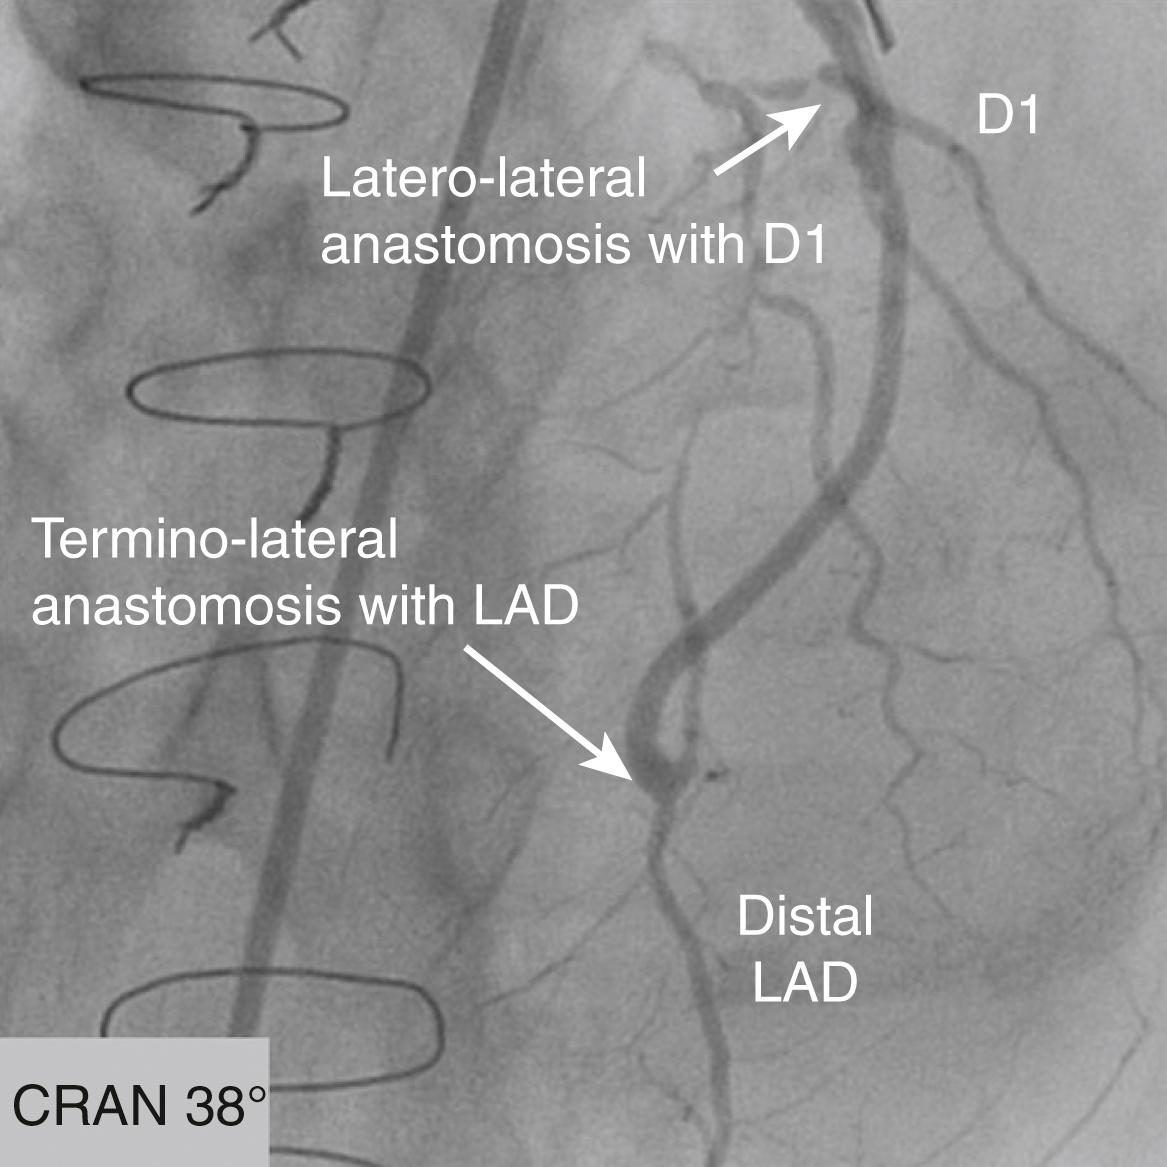 FIGURE 21.6, Sequential saphenous vein graft to the first diagonal branch ( D1 ) and left anterior descending artery ( LAD ) with latero-lateral anastomosis to D1 and termino-lateral anastomosis to the distal LAD. CRAN, Cranial.